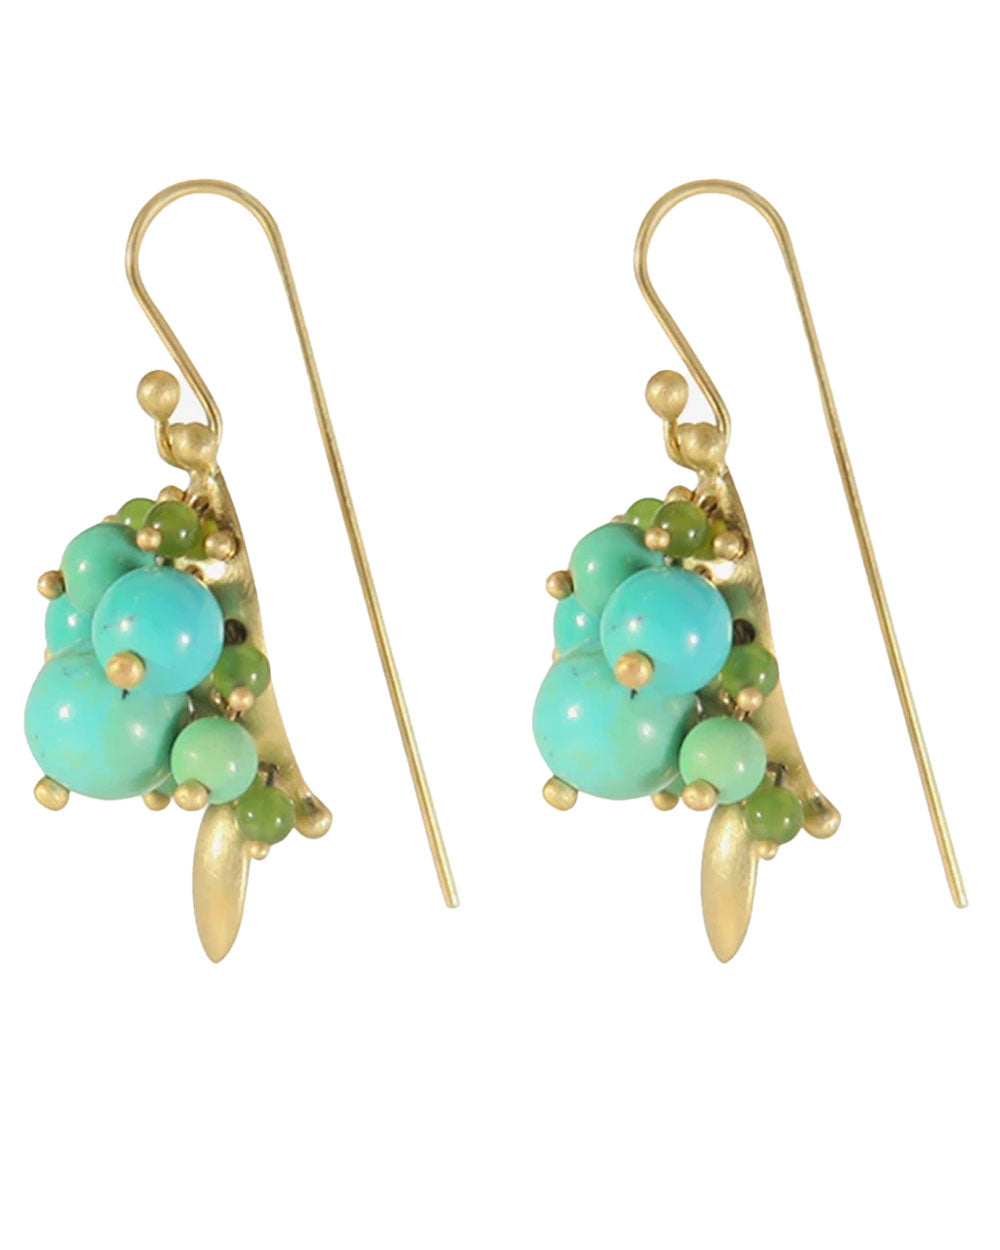 Chinese Turquoise Bug Cluster Earrings